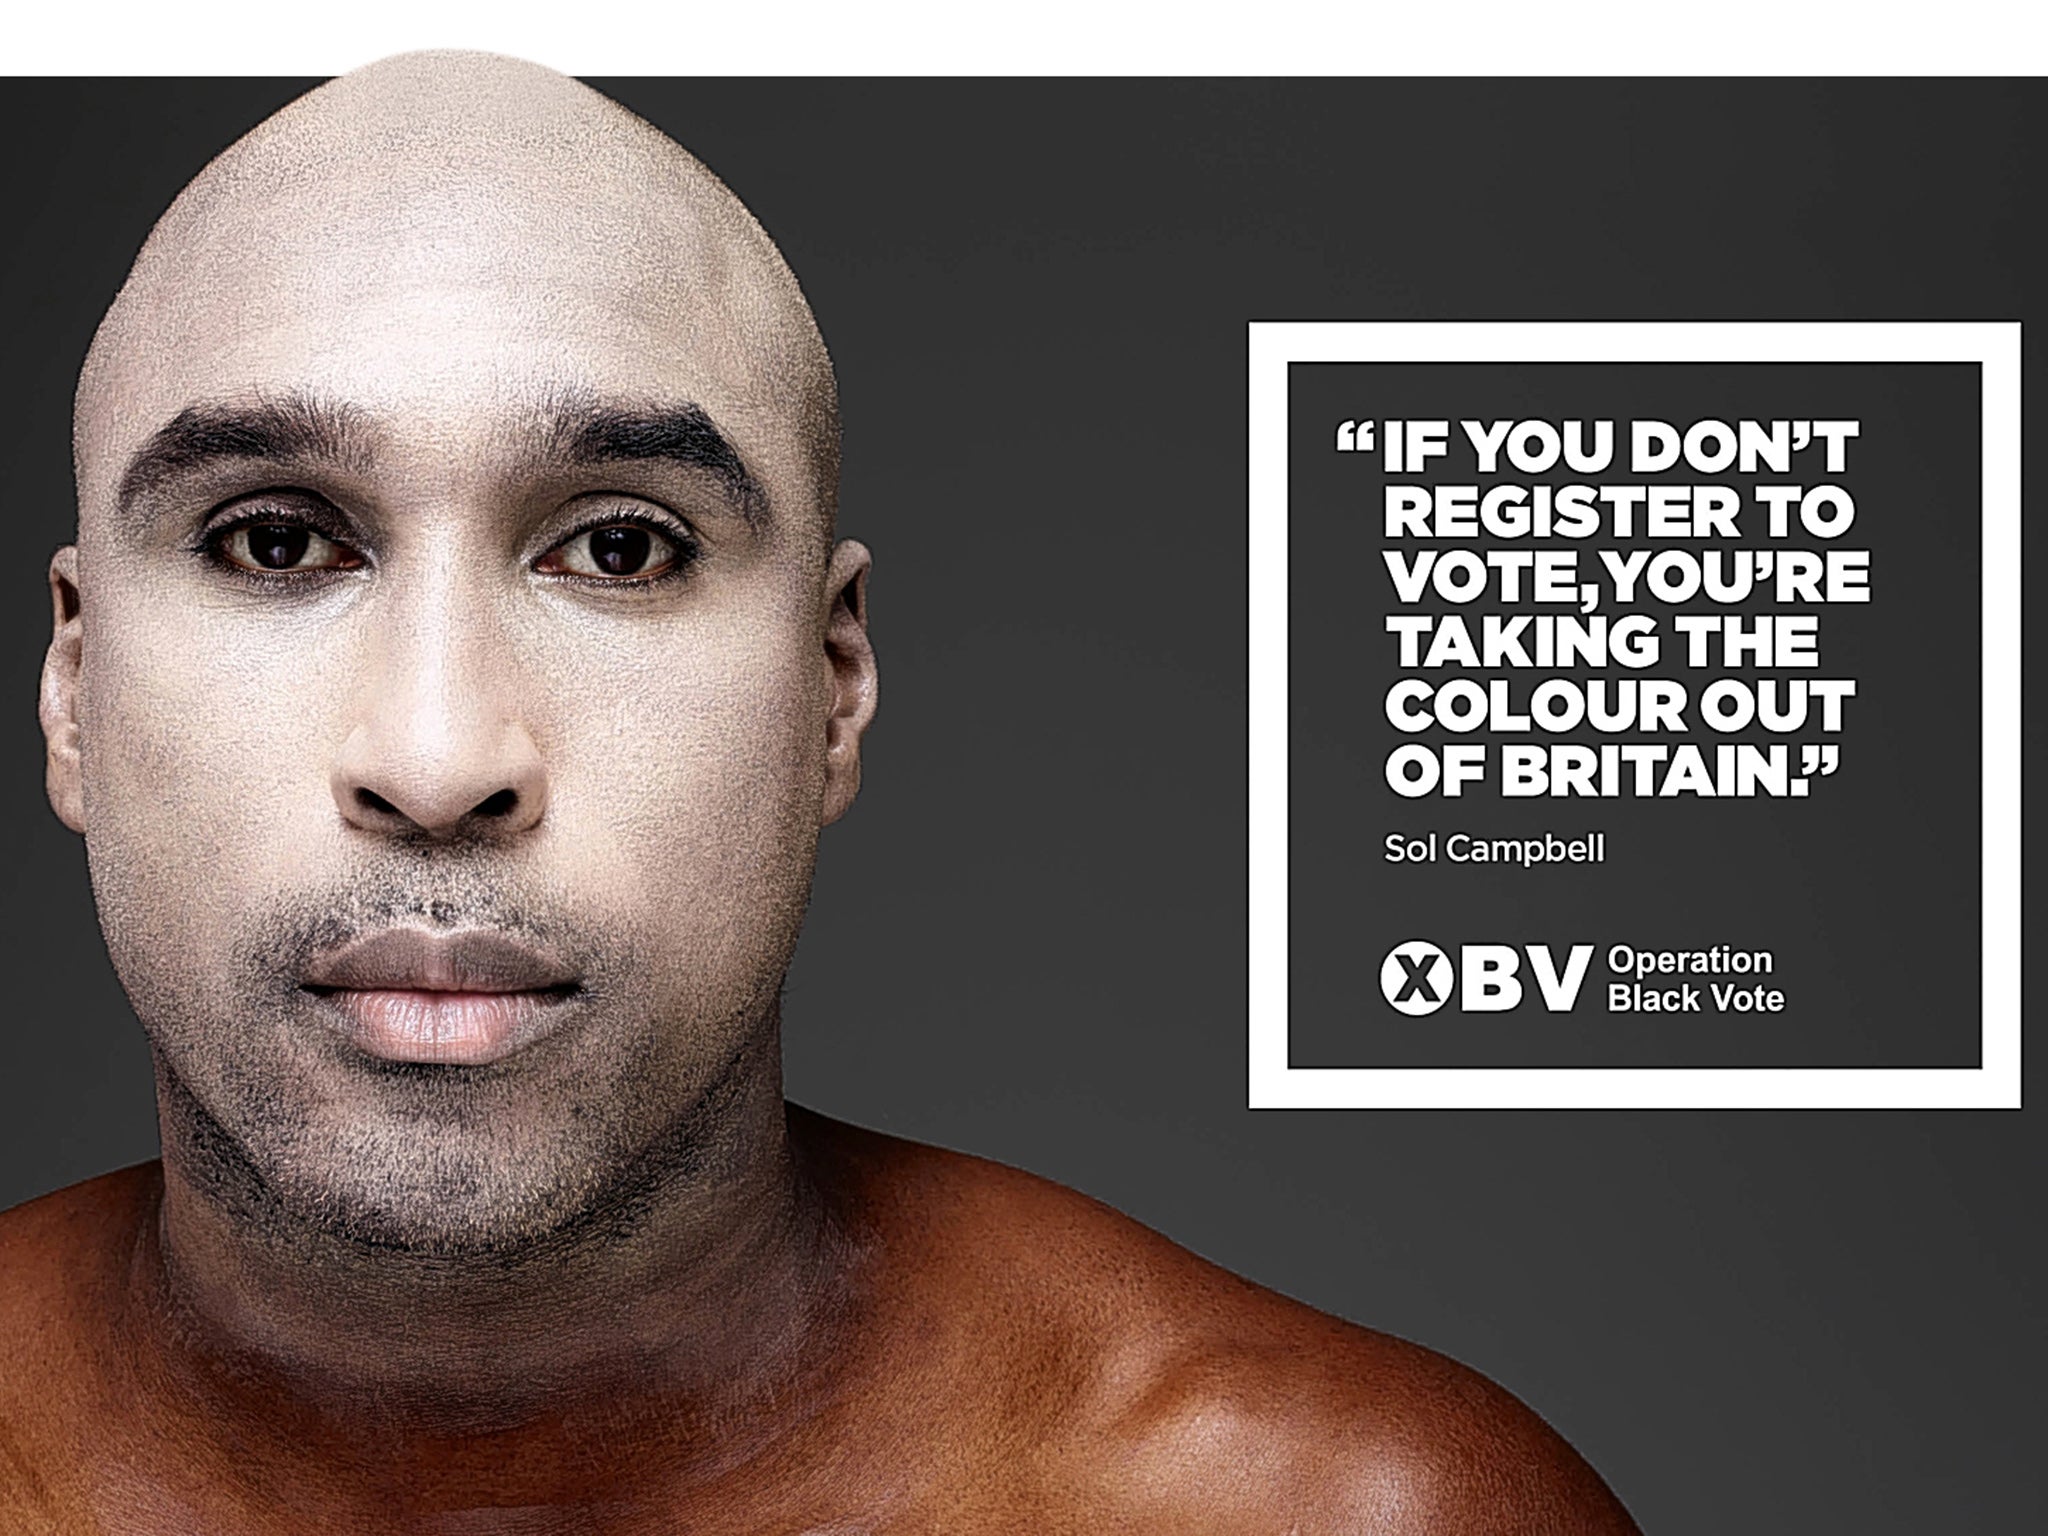 Sol Campbell is part of Operation Black Vote